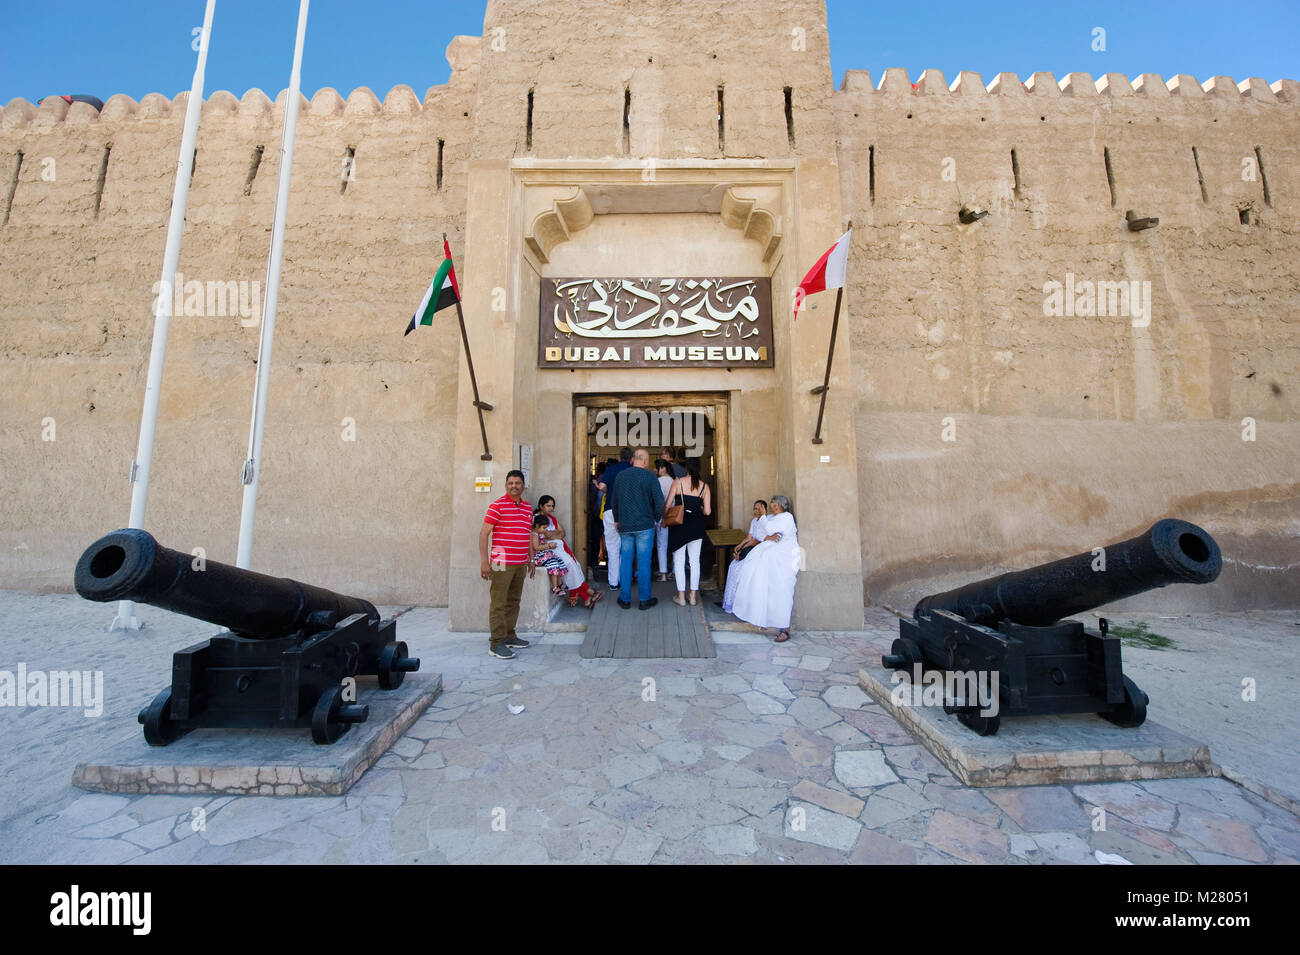 DUBAI, UNITED ARAB EMIRATES - JAN 02, 2018: The entrance of the Dubai museum with two cannons in front. It's a famous place visited by tourists. Stock Photo